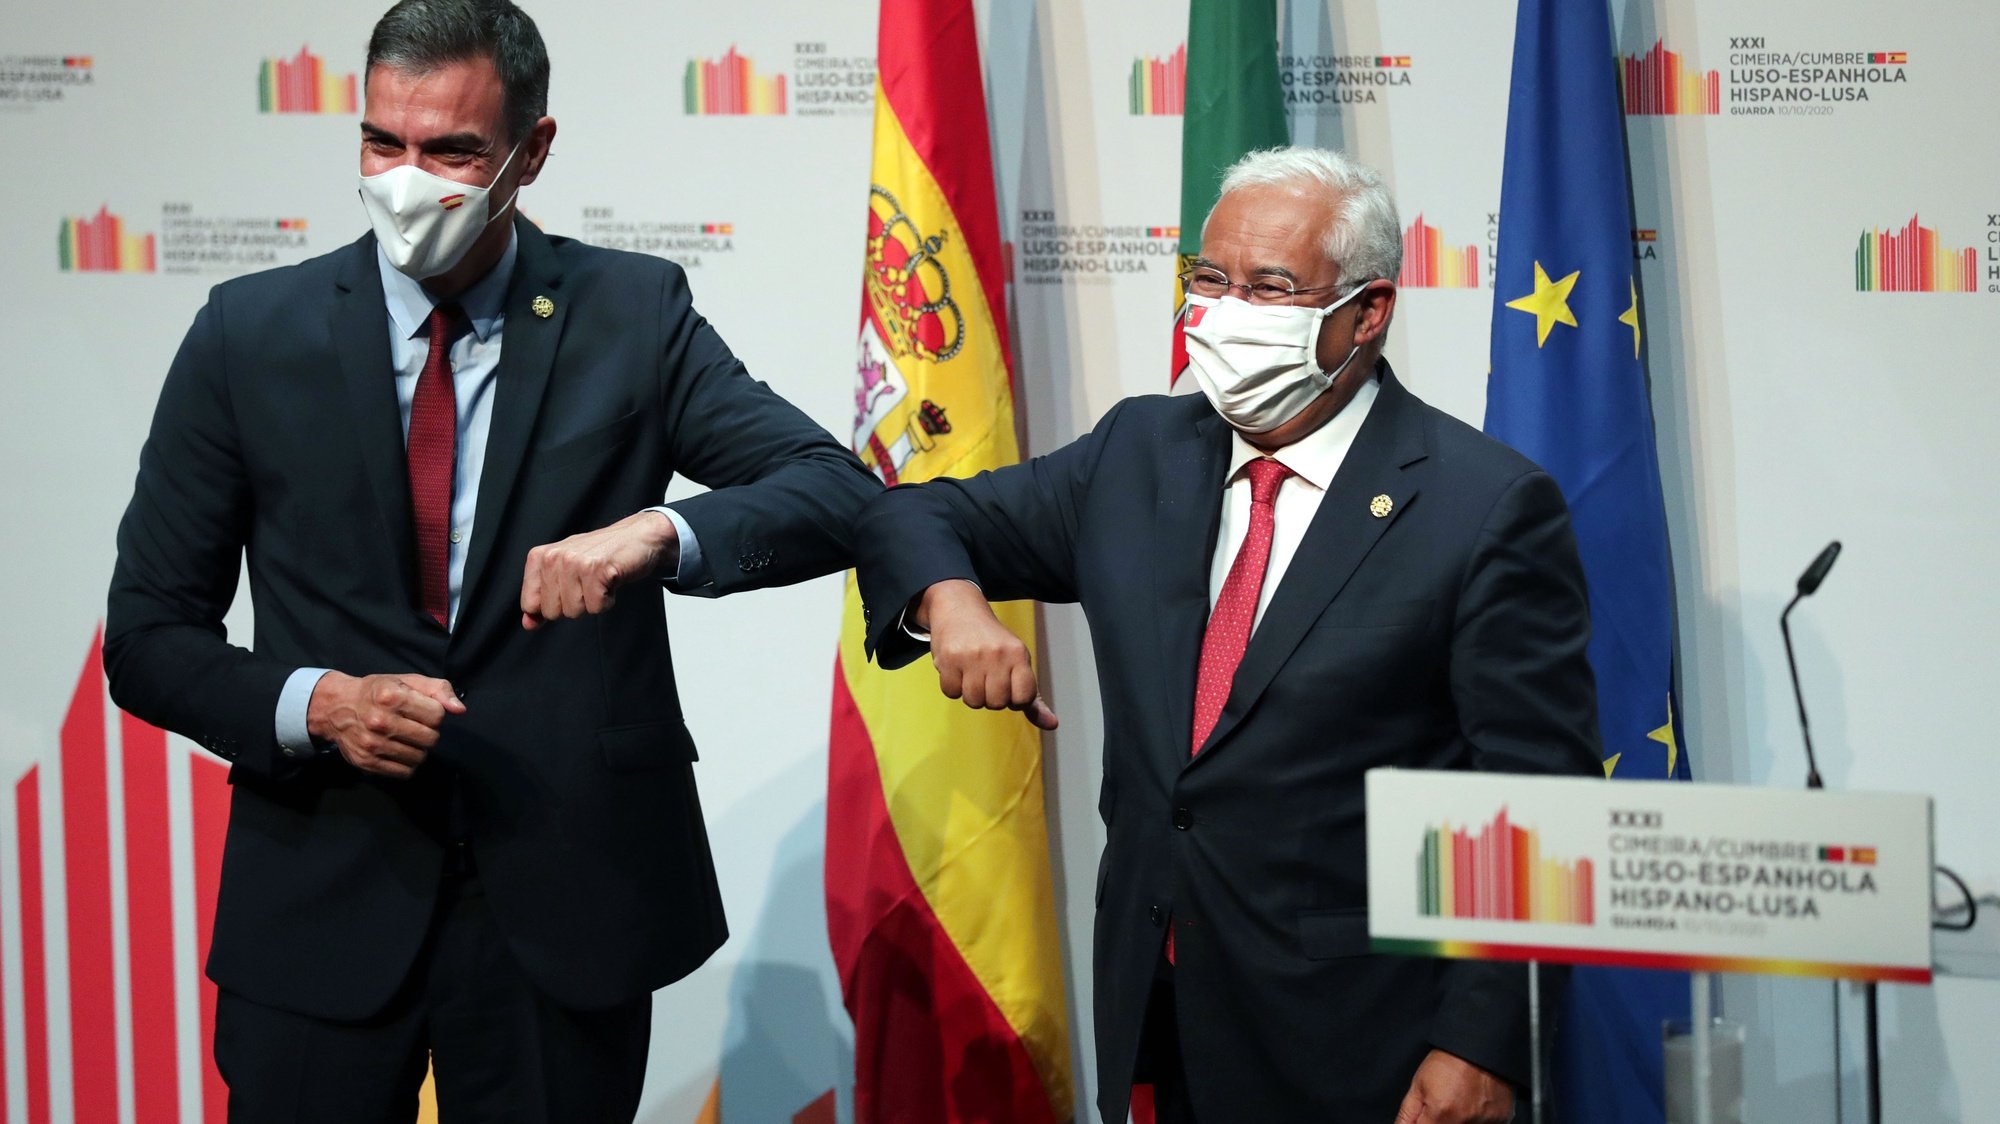 Portuguese Prime Minister, Antonio Costa (R), and his counterpart the President of the Spanish government, Pedro Sanchez (L), attend a conference during the 31th Portuguese Spanish Summit in Guarda, Portugal, 10 october 2020. Pedro Sanchez  is on a one day official visit to Guarda for the 31th Spanish-Portuguese Summit. ESTELA SILVA/LUSA